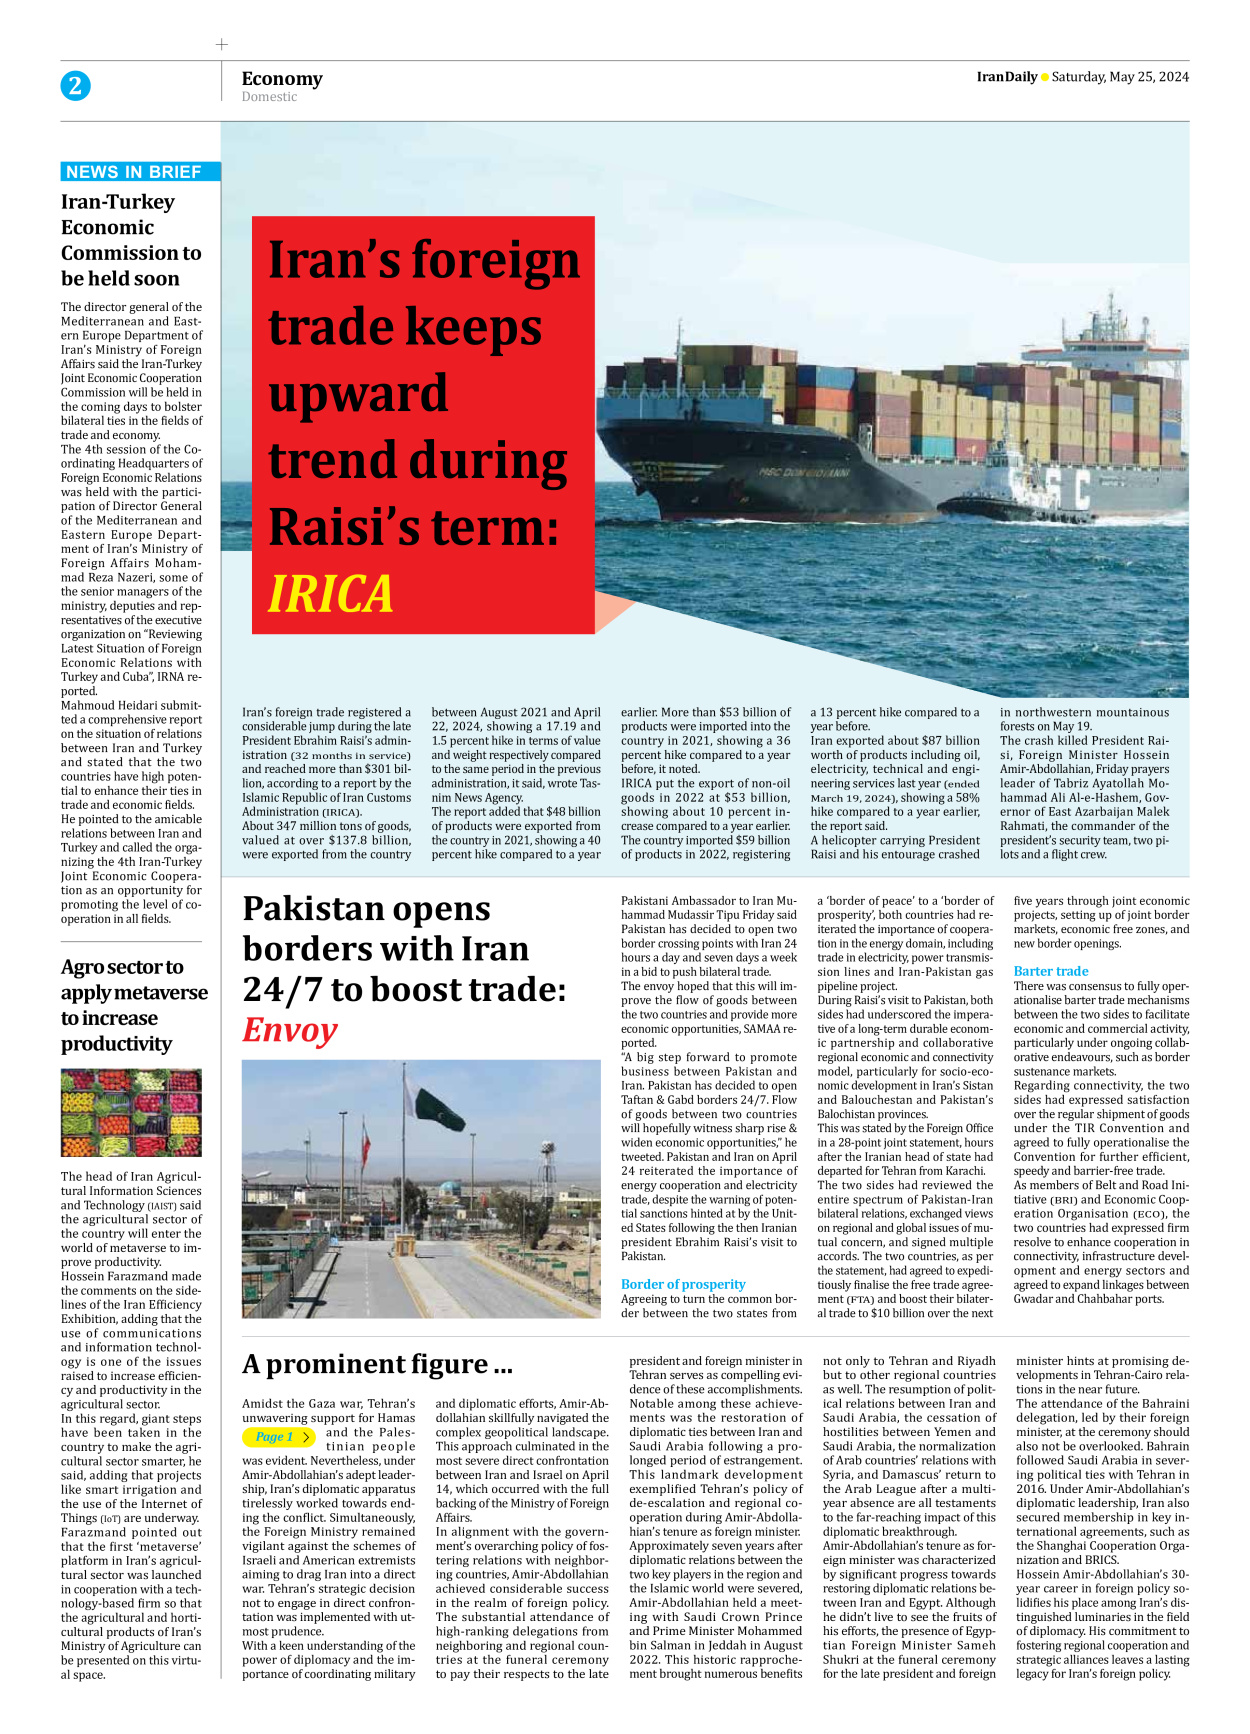 Iran Daily - Number Seven Thousand Five Hundred and Sixty Five - 25 May 2024 - Page 2